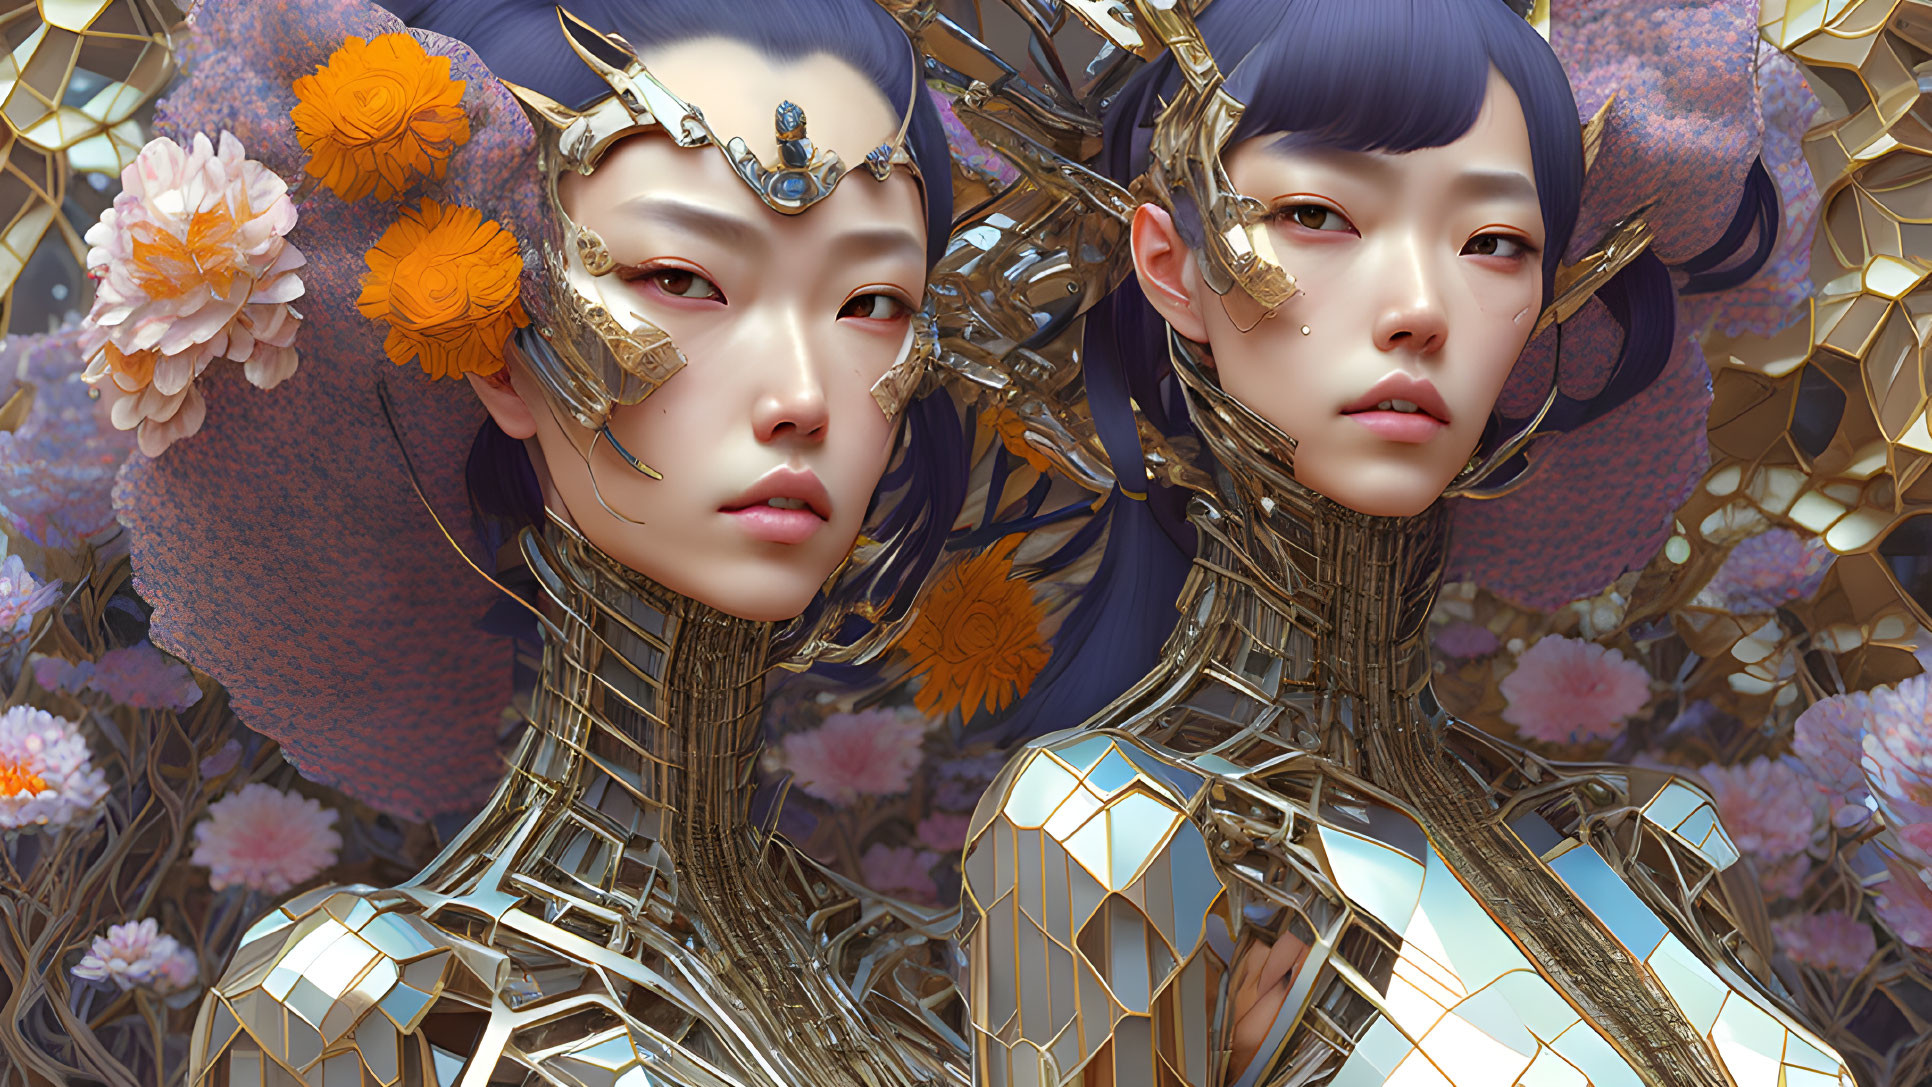 Identical metallic female figures with golden headpieces in vibrant setting